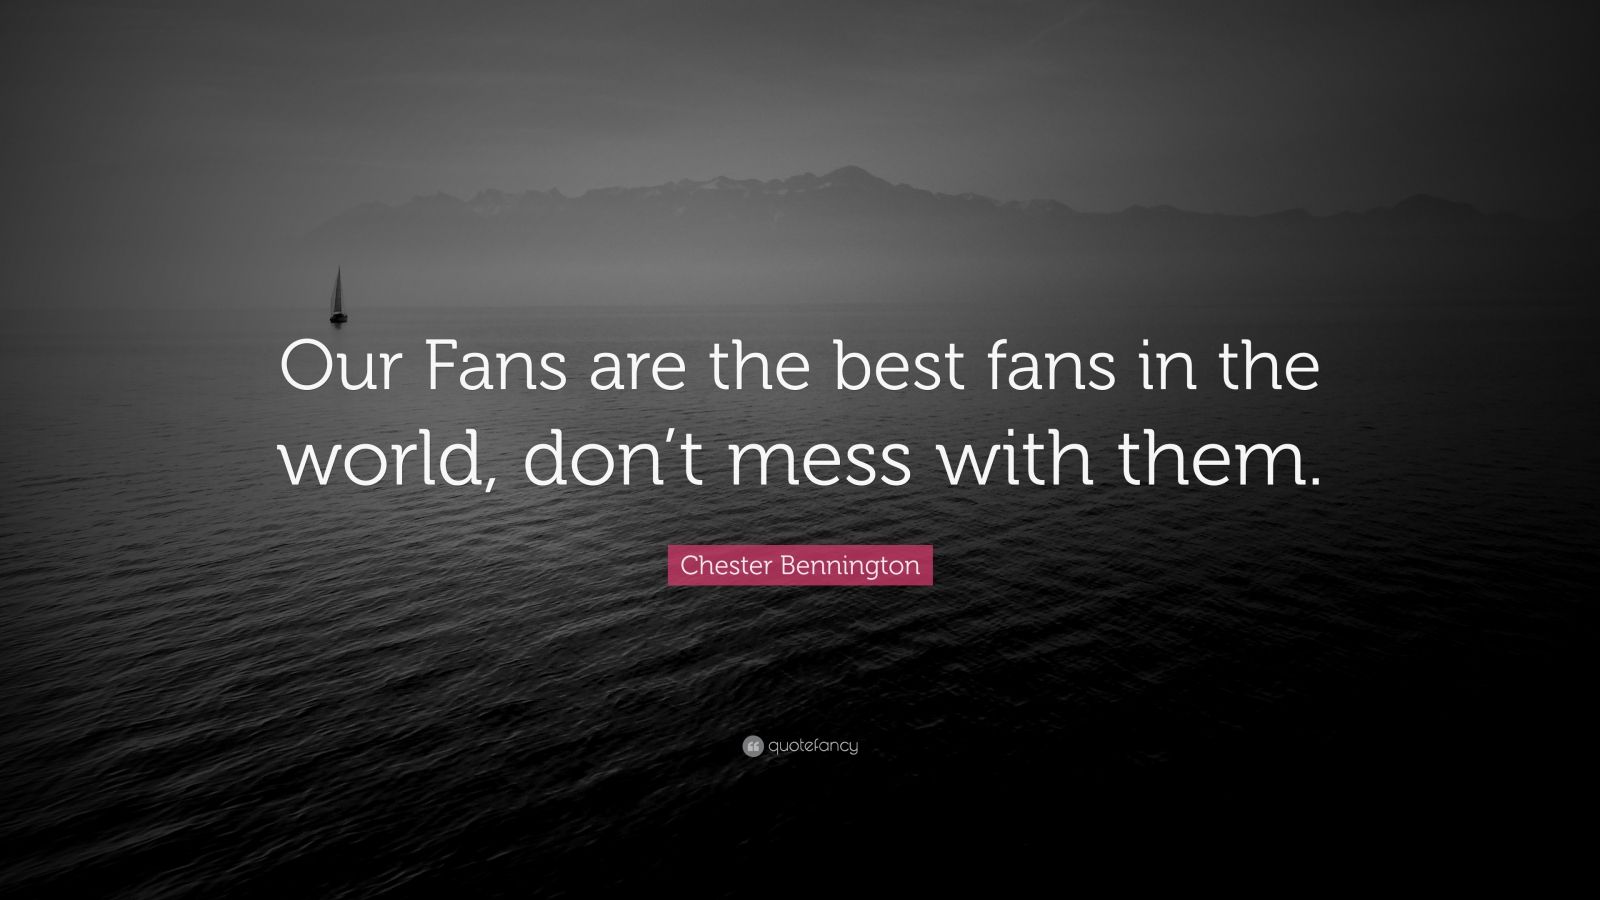 Chester Bennington Quotes (27 wallpapers) - Quotefancy